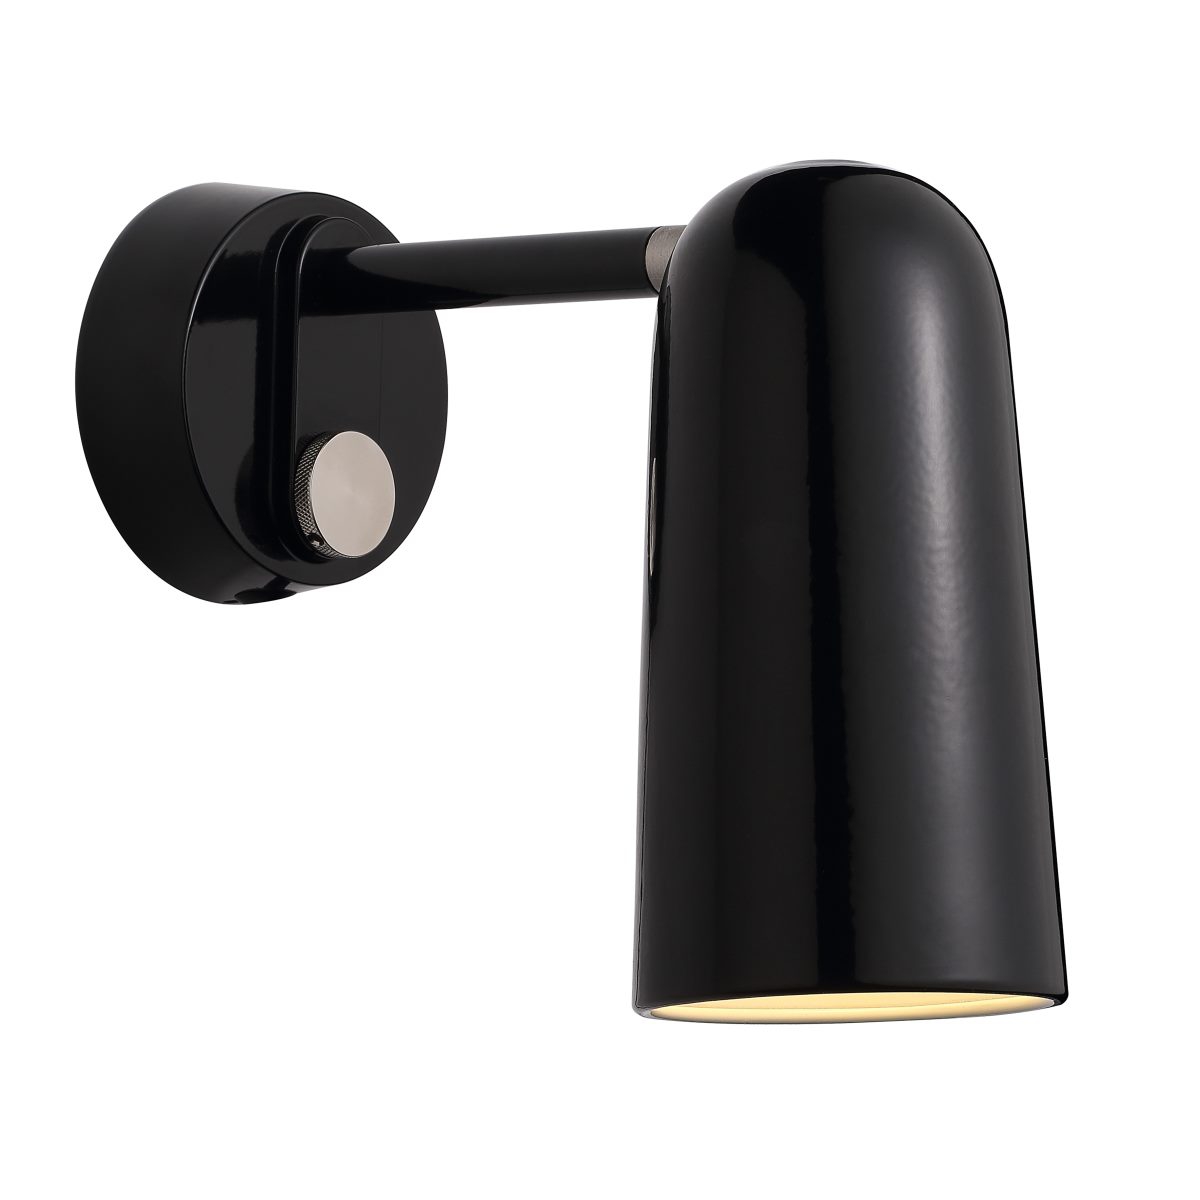 design for the people Tippy Wandleuchte E27 schwarz Dimmer inkl-